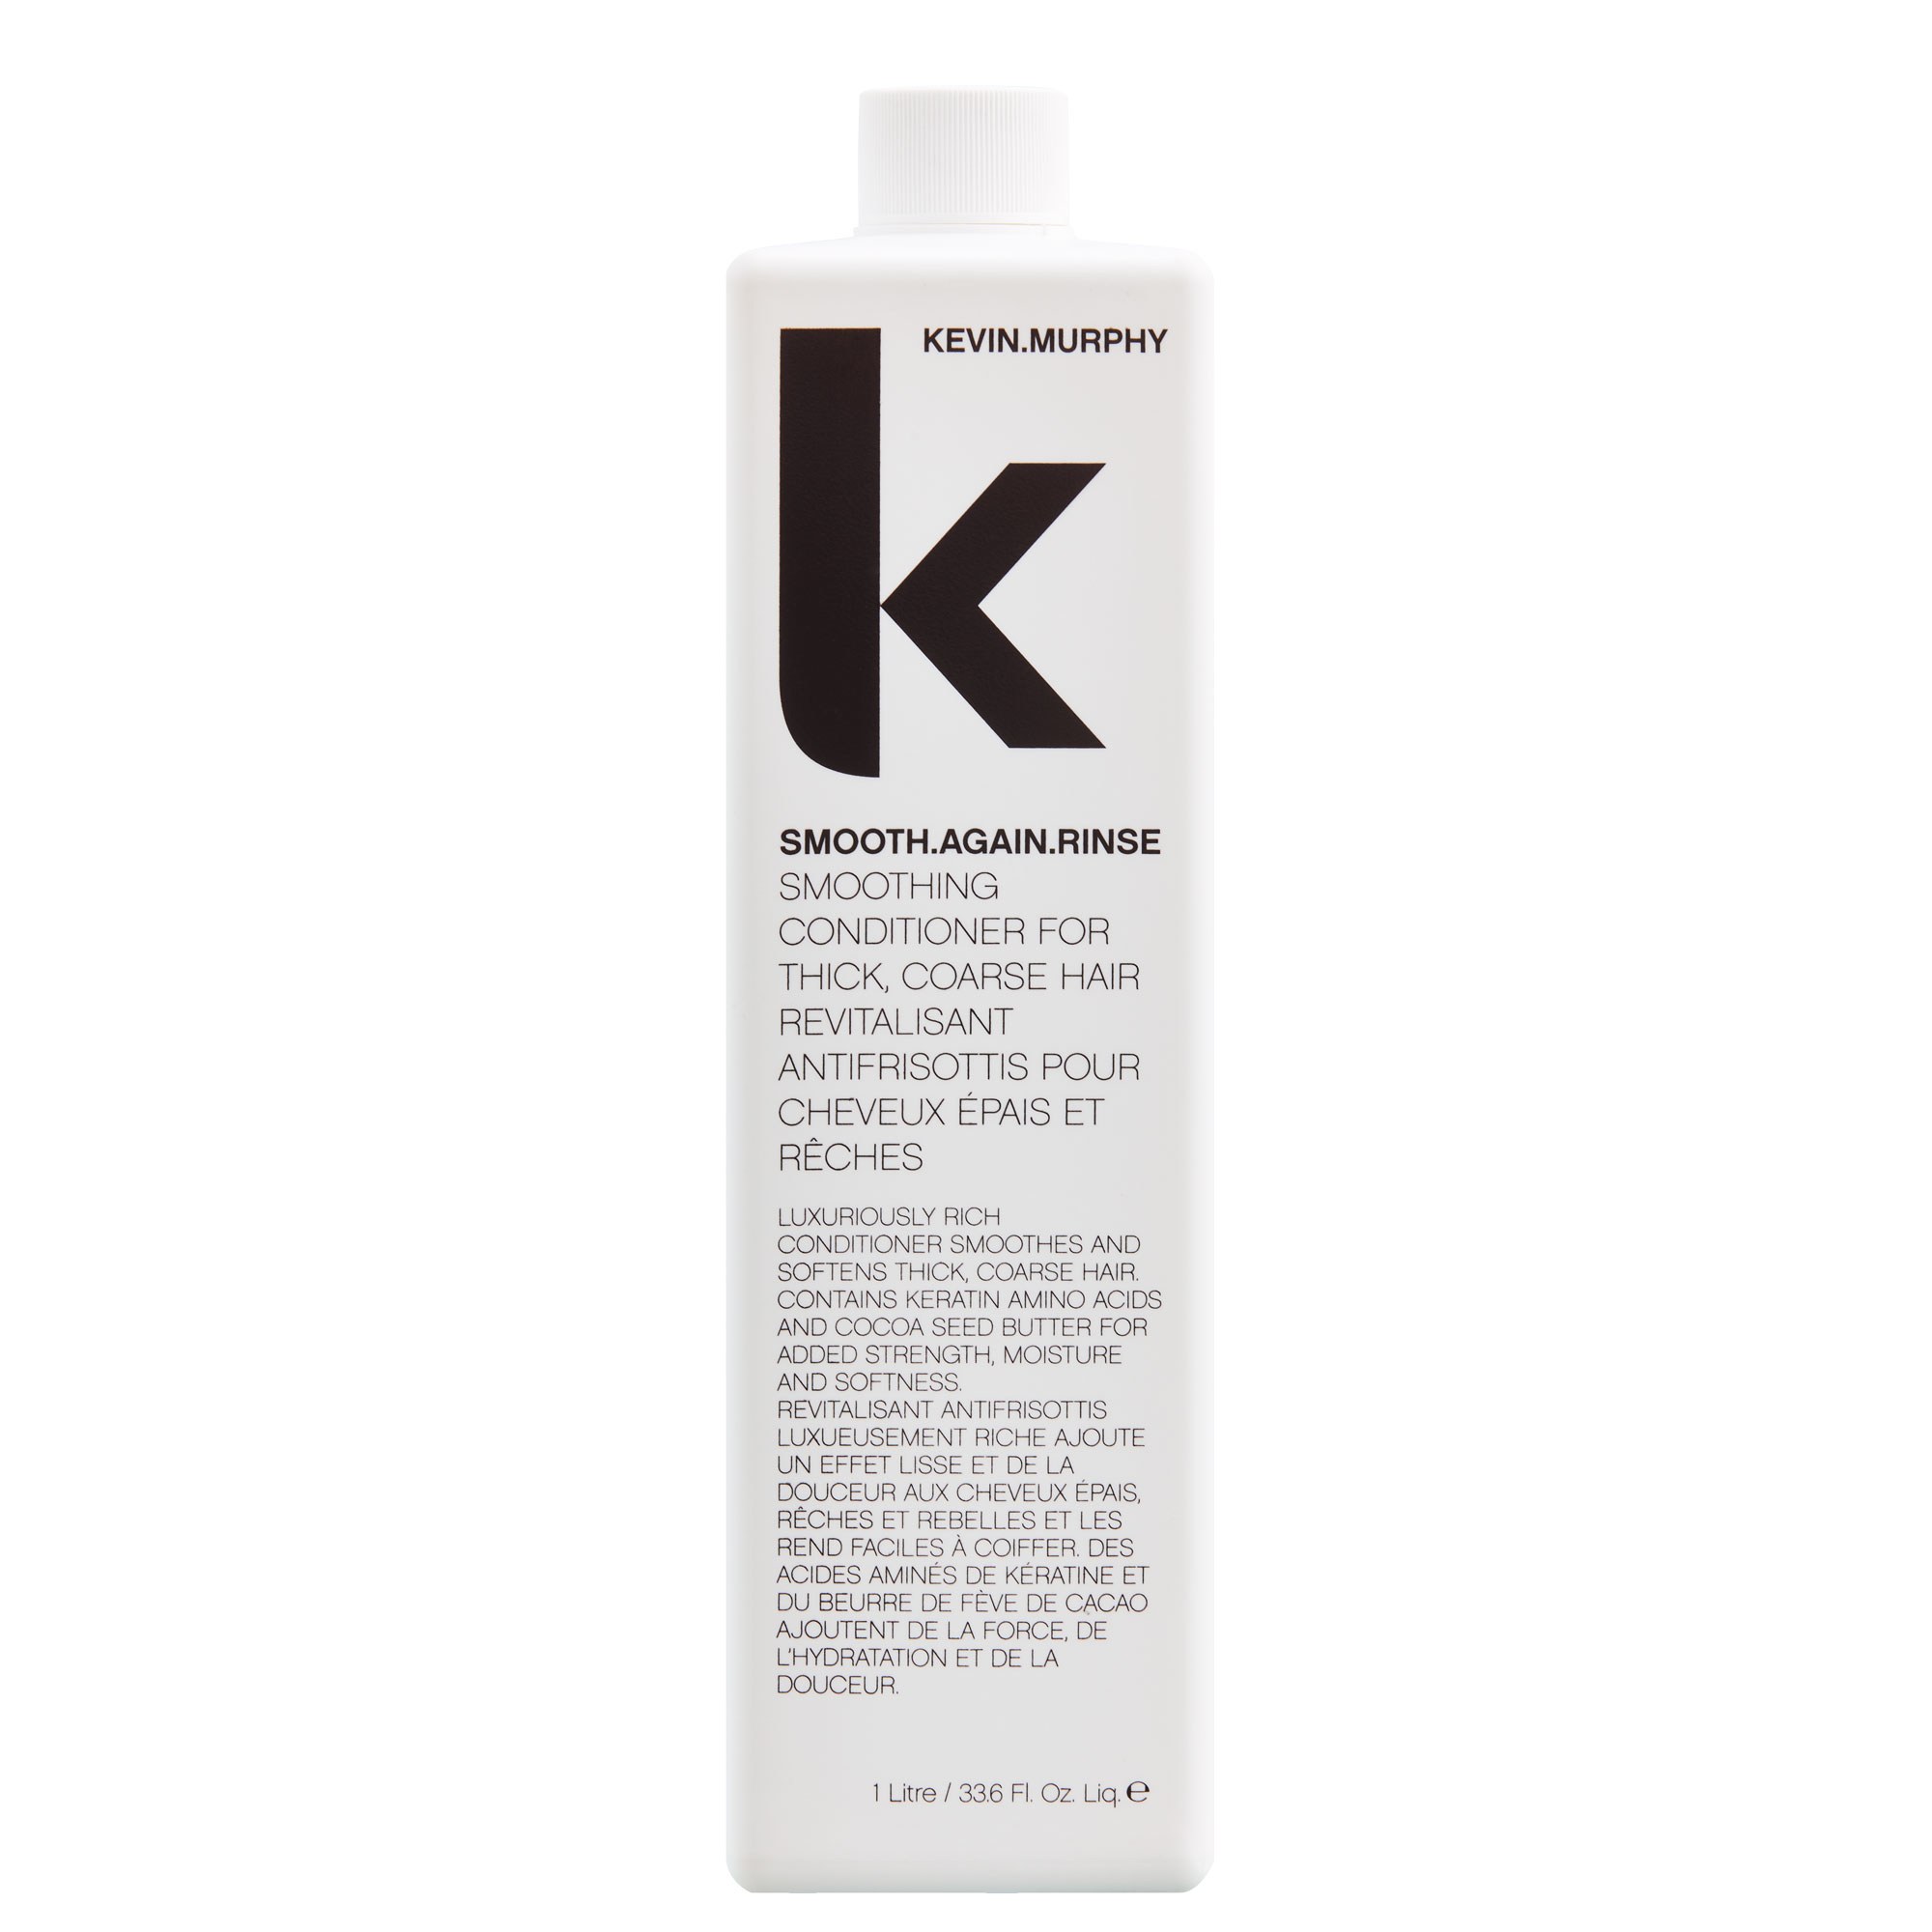 KEVIN.MURPHY SMOOTH.AGAIN Rinse